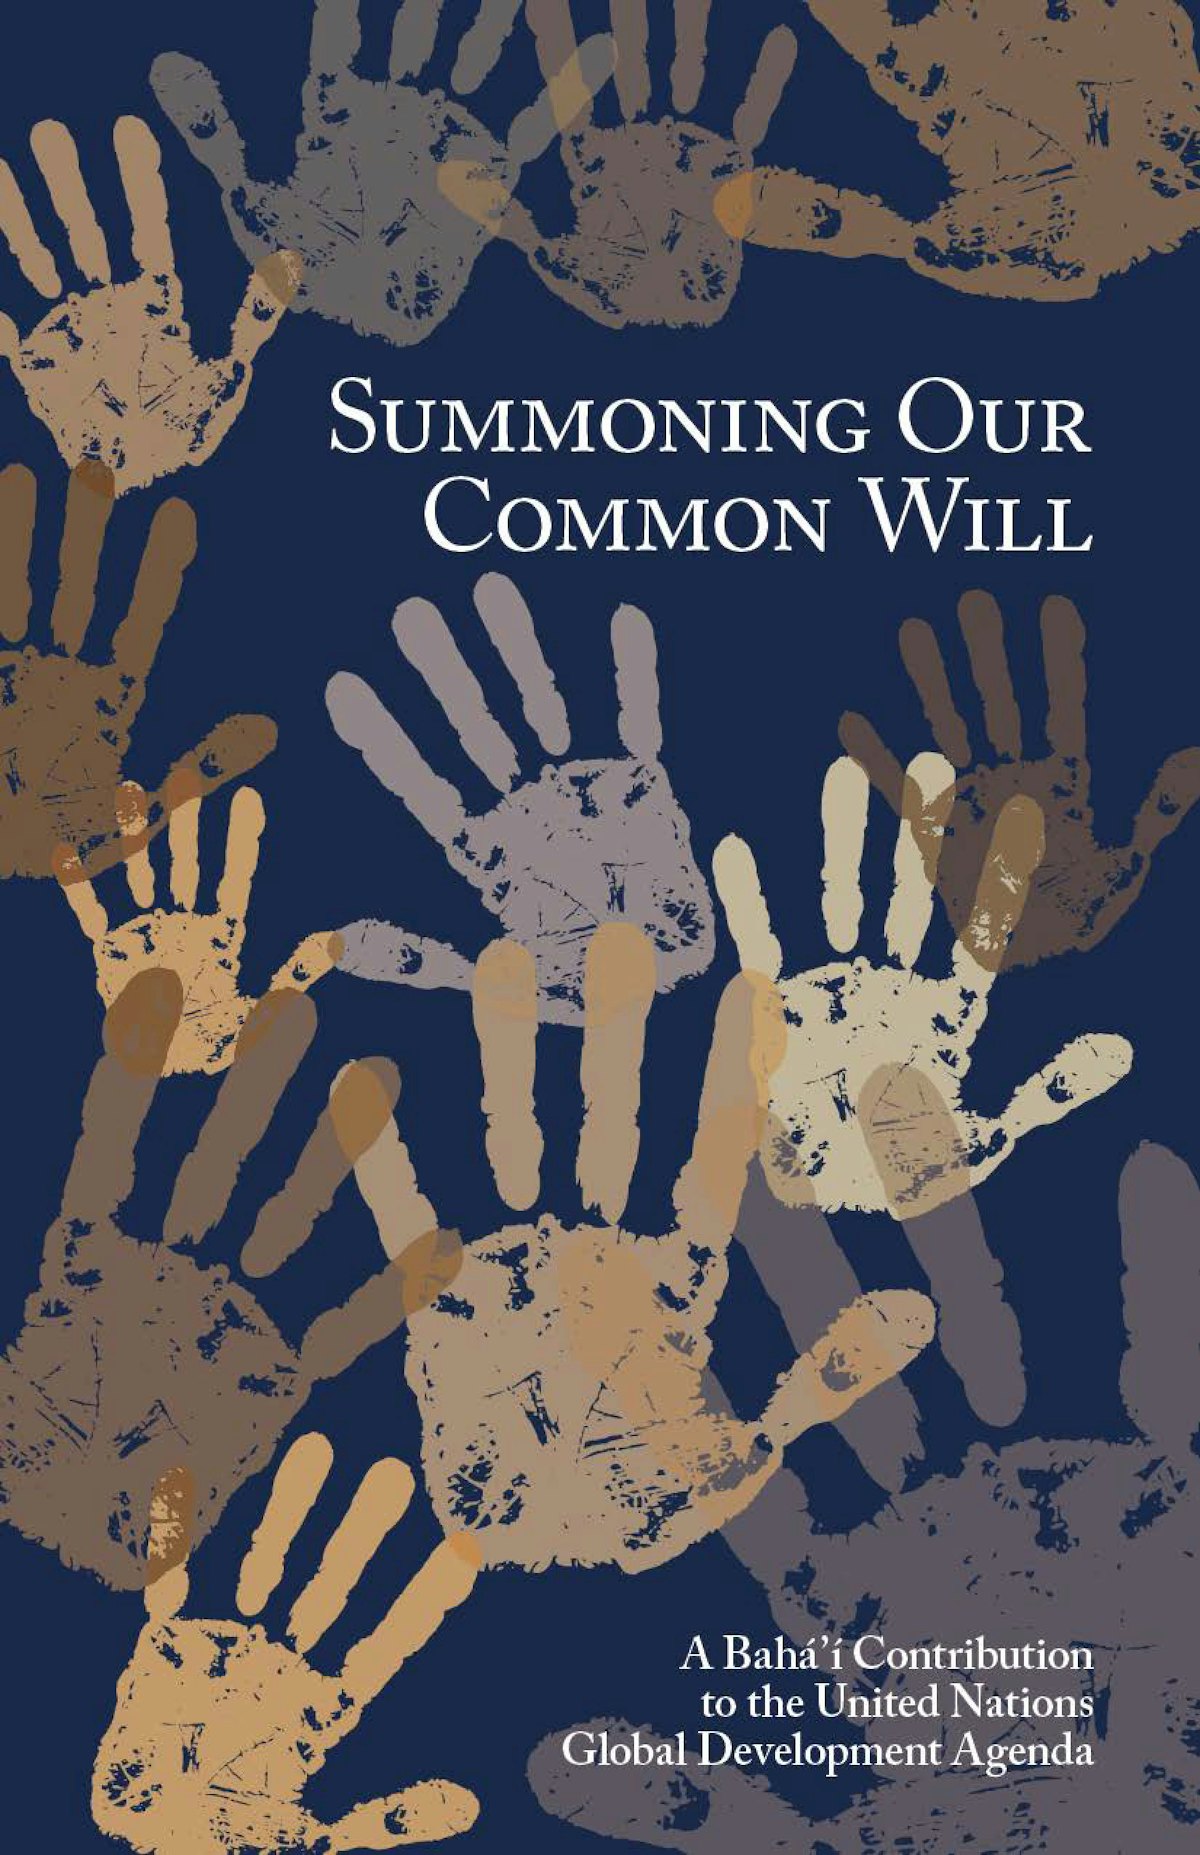 "Summoning Our Common Will" is a Baha'i contribution to Agenda 2030, the UN's Sustainable Development Goals